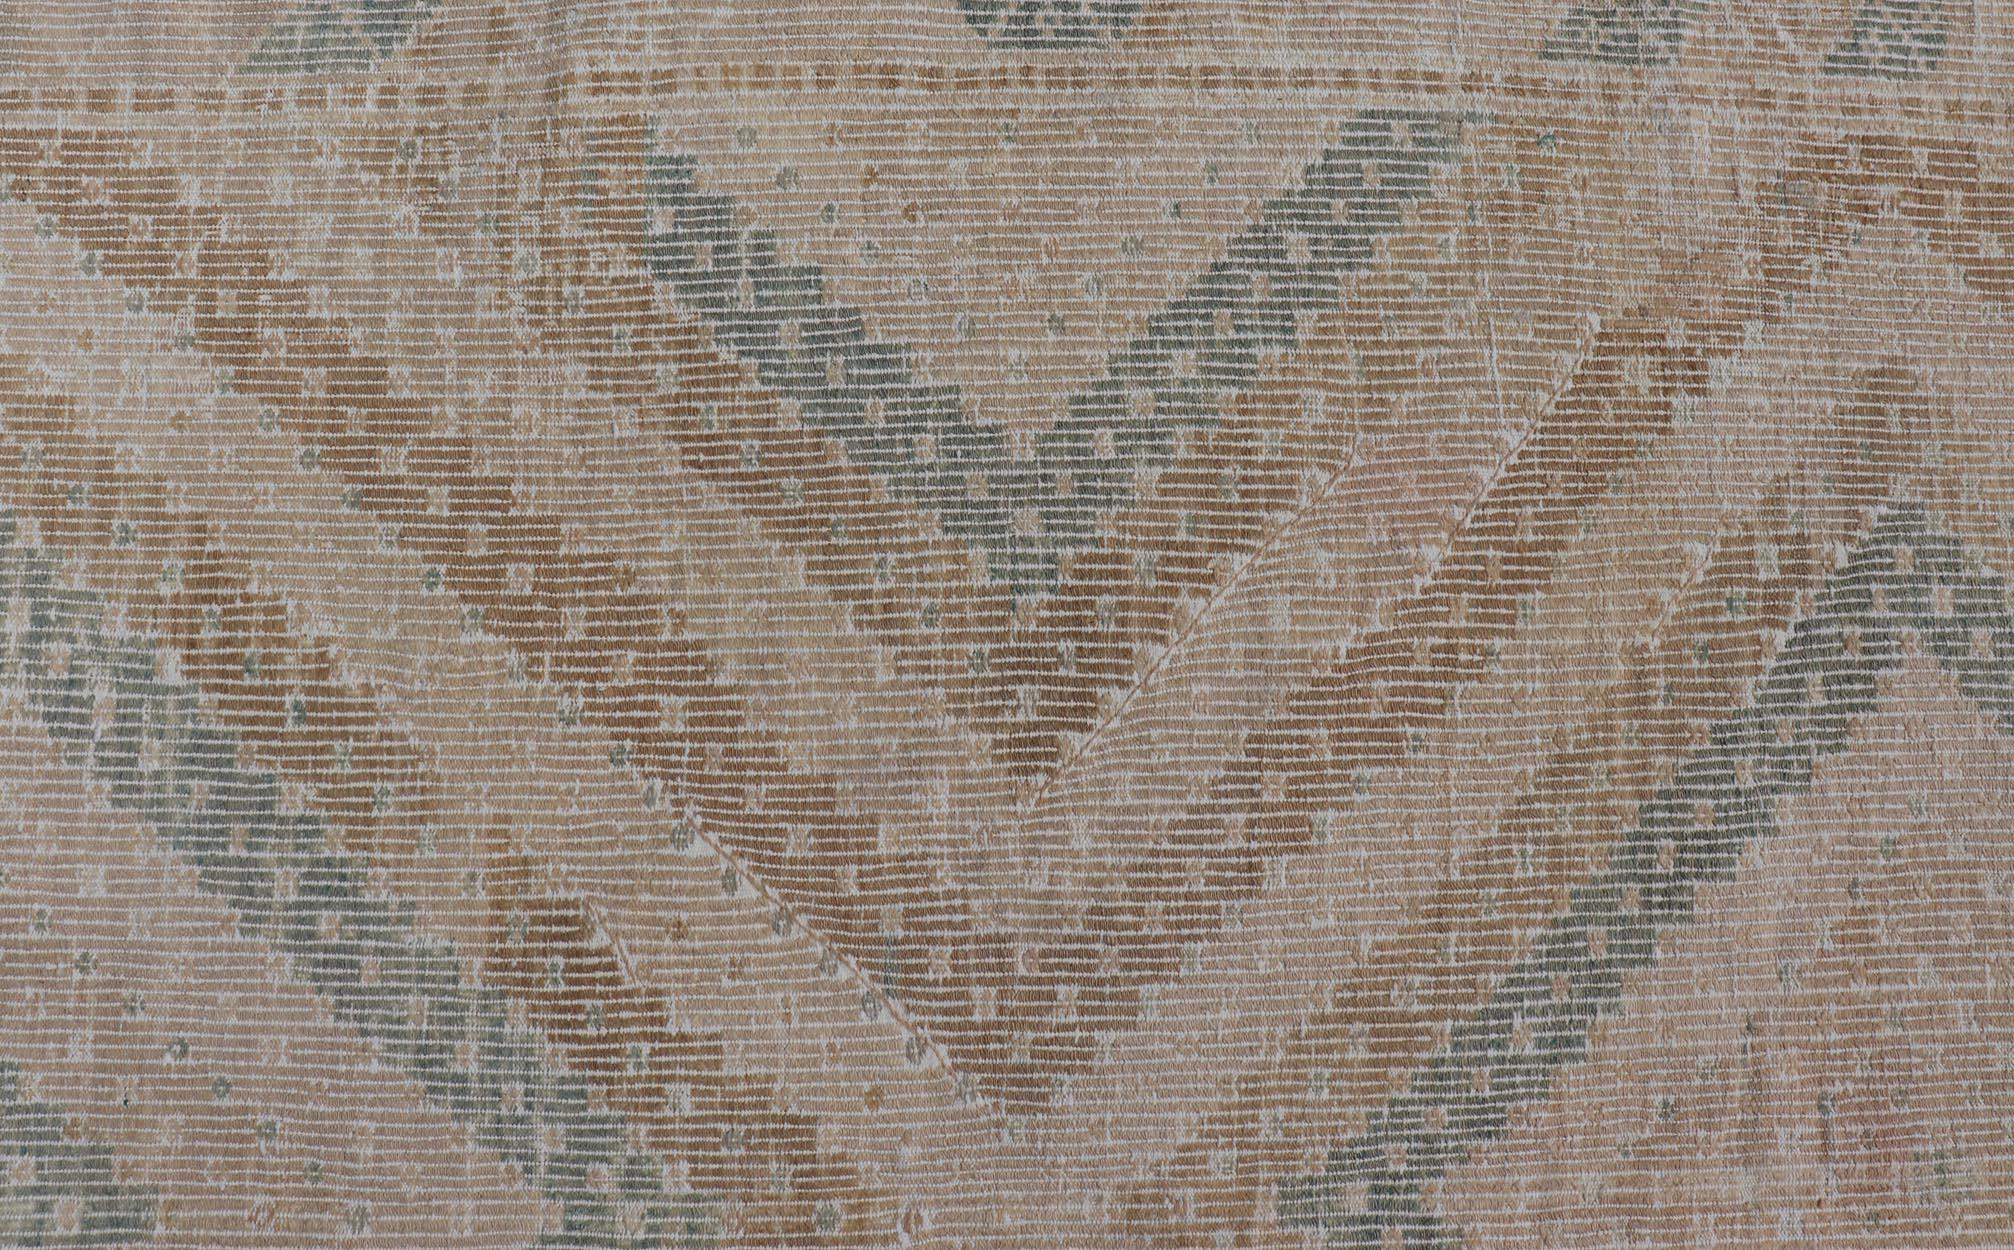 This flat-weave tribal Turkish kilim has been hand-woven in wool. The rug features an all-over sub-geometric diamond design, and is rendered in blue and earthy tones; making this rug a superb fit for a wide variety of interiors.
 
Vintage Kilim